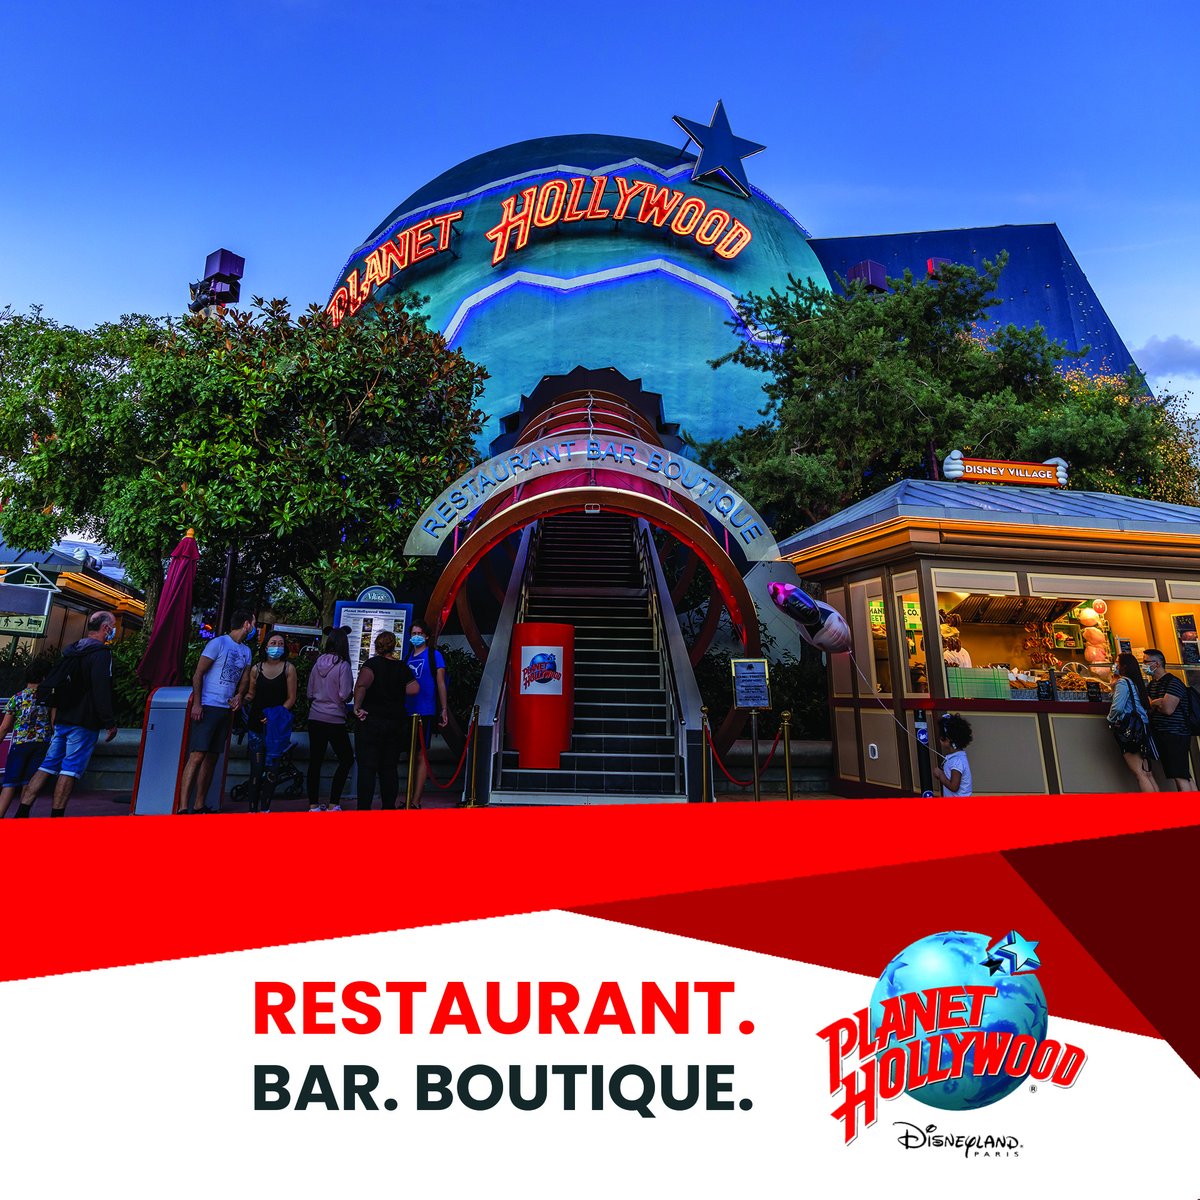 We are hard to miss. Come find us in Disney Village for an unforgettable dining experience. American fare, local specialities and of course, a kids menu! #planethollywooddlp #planethollywood #disneylandparis #disneyvillage #disneydining #familyfriendly #familydining